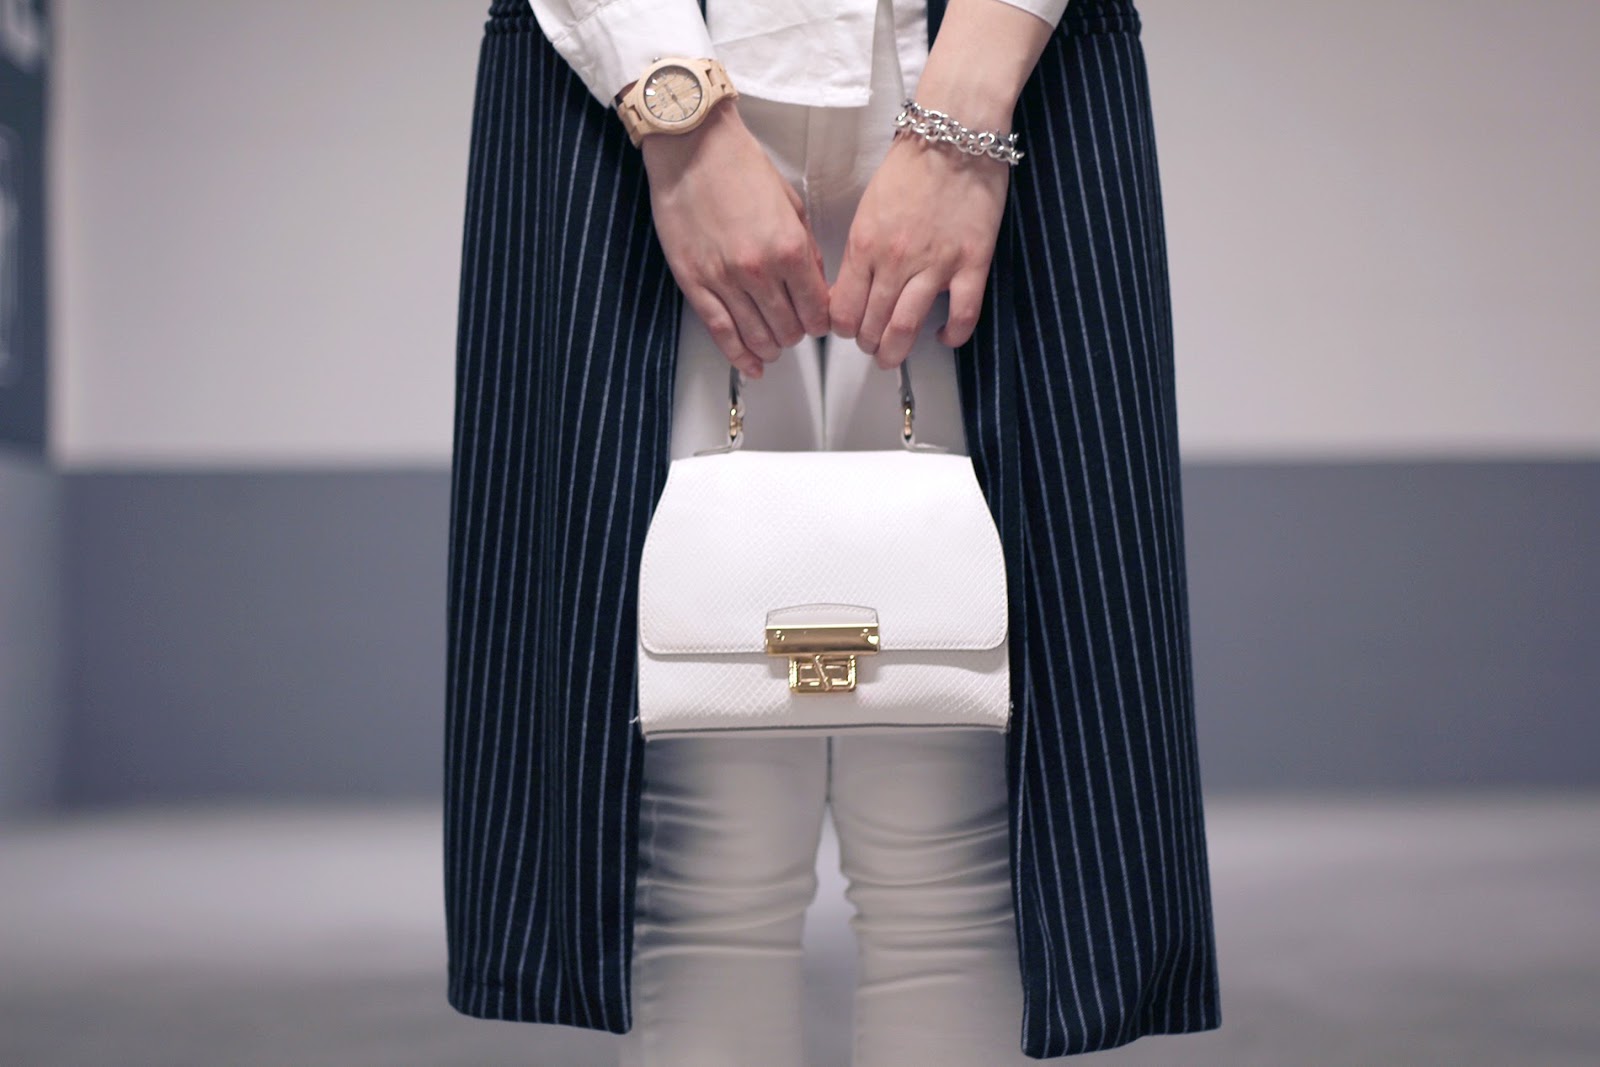 fashion style blogger outfit ootd italian girl italy trend vogue glamour pescara prospering flats ballerine shoes miss coquinas long gilet stripes urban white total look skirt cat collar aliexpress new look bag borsa camicia collo gatto word wood watch orologio legno braid hairstyle treccia capelli